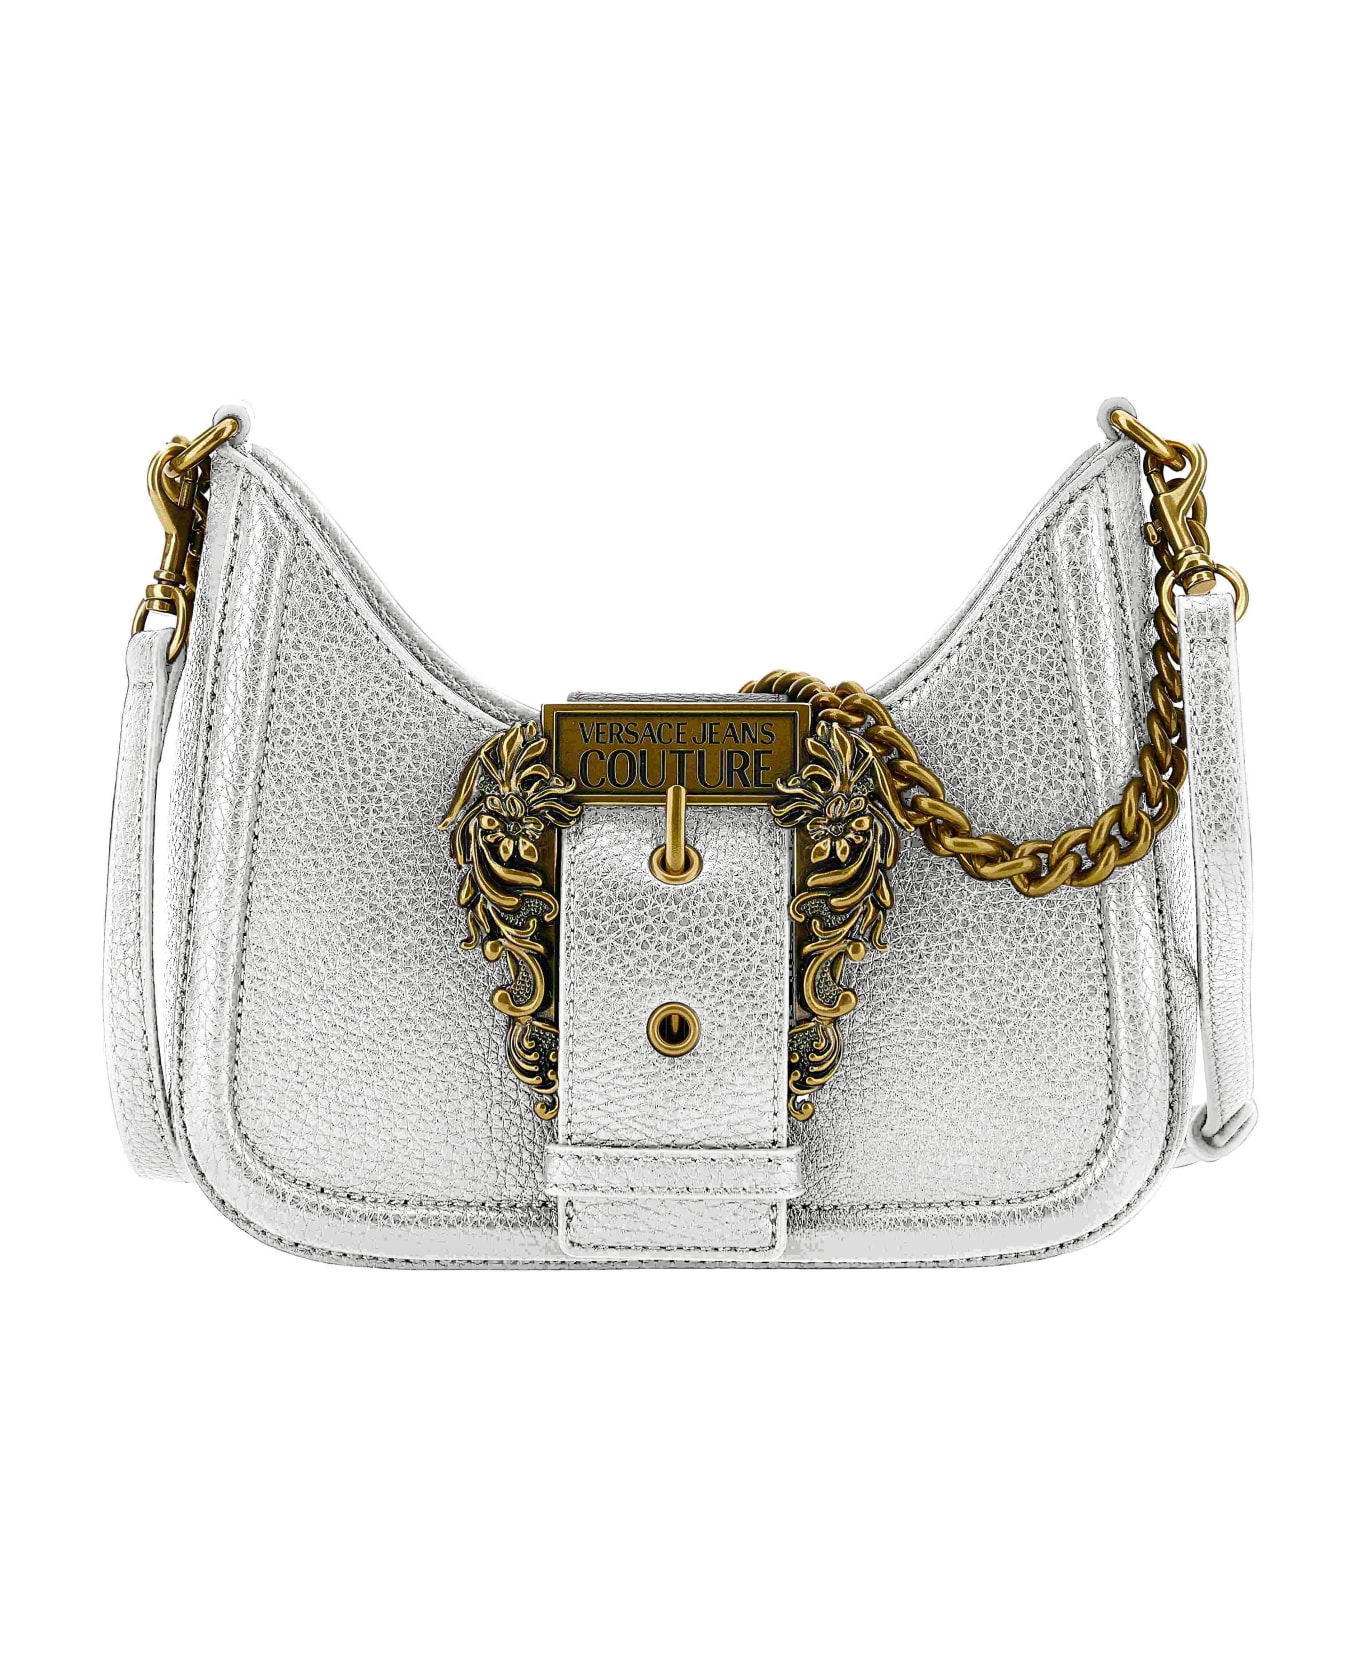 Versace Jeans Couture Bag - BIANCO OTTICO トートバッグ